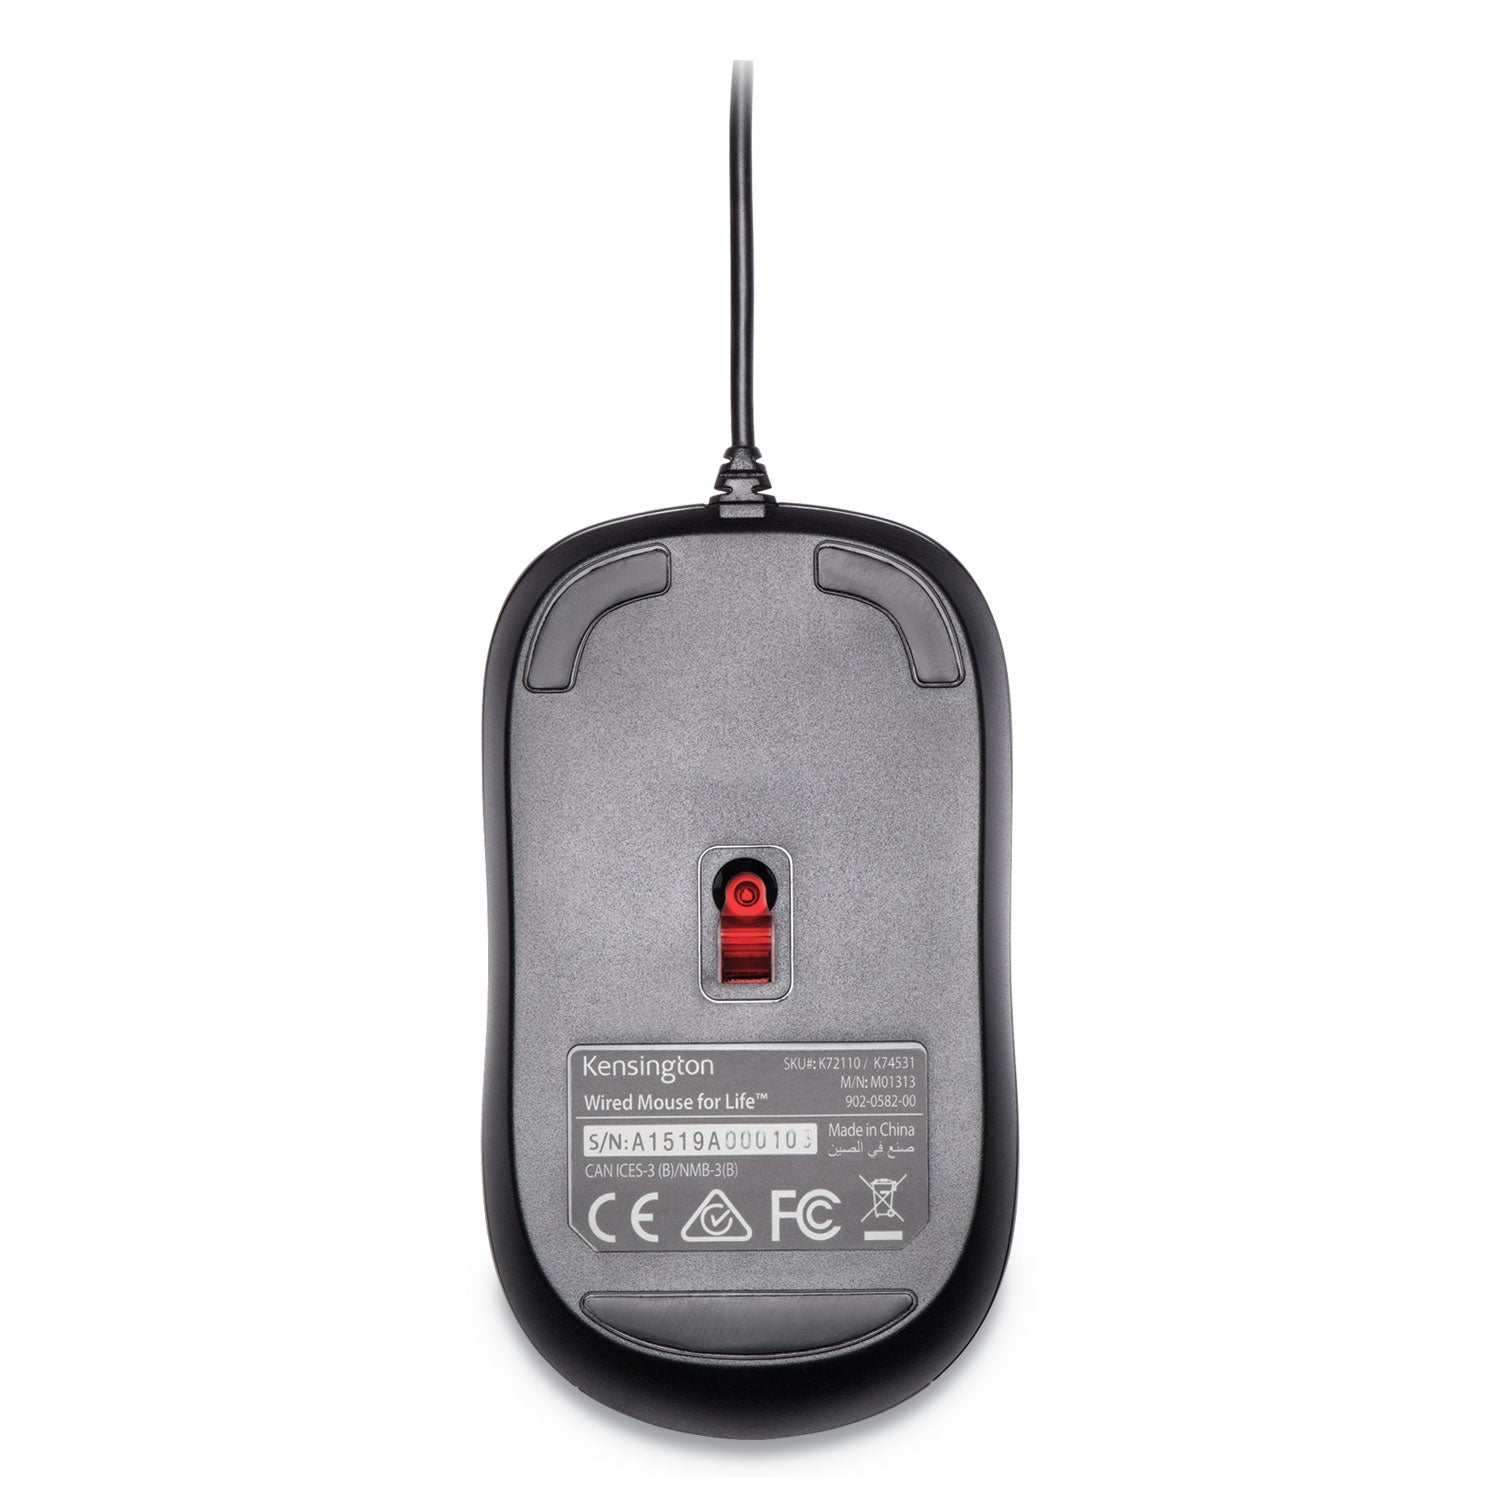 Wired USB Mouse for Life, USB 2.0, Left/Right Hand Use, Black - 3